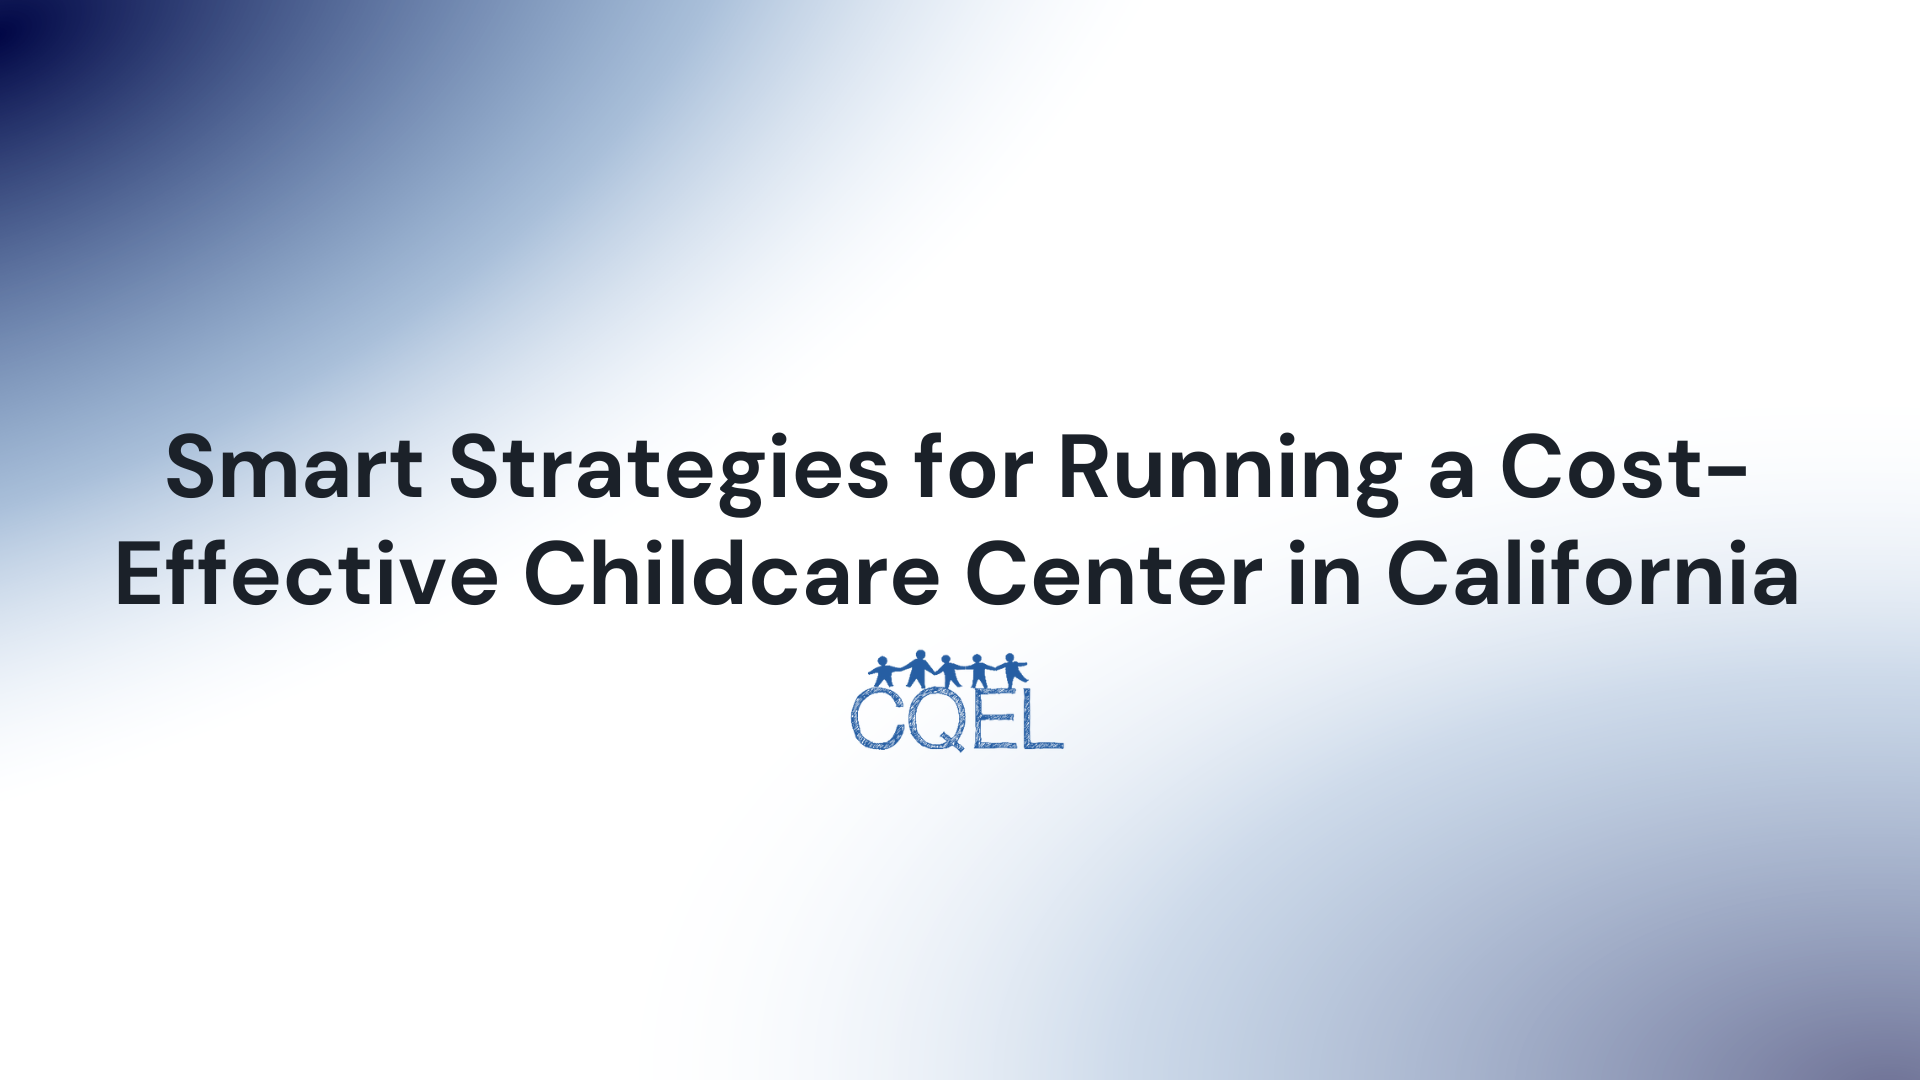 Smart Strategies for Running a Cost-Effective Childcare Center in California